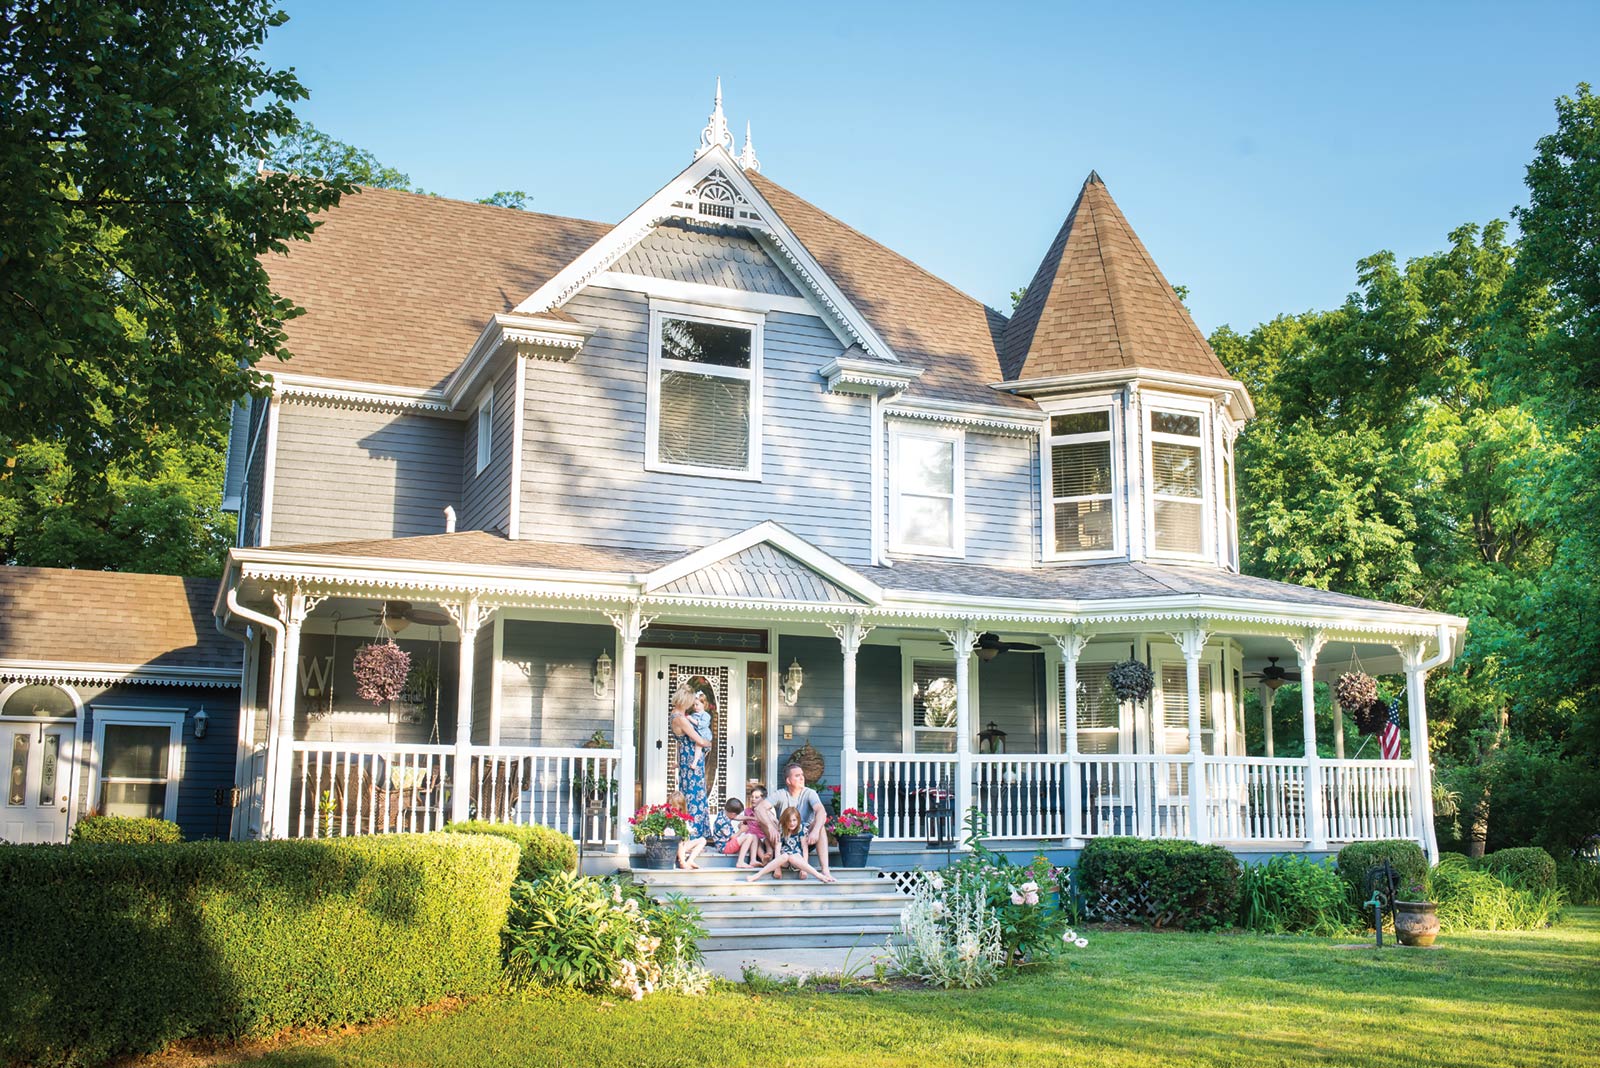 The Wood family from Columbia MO posing on their Victorian home's front porch